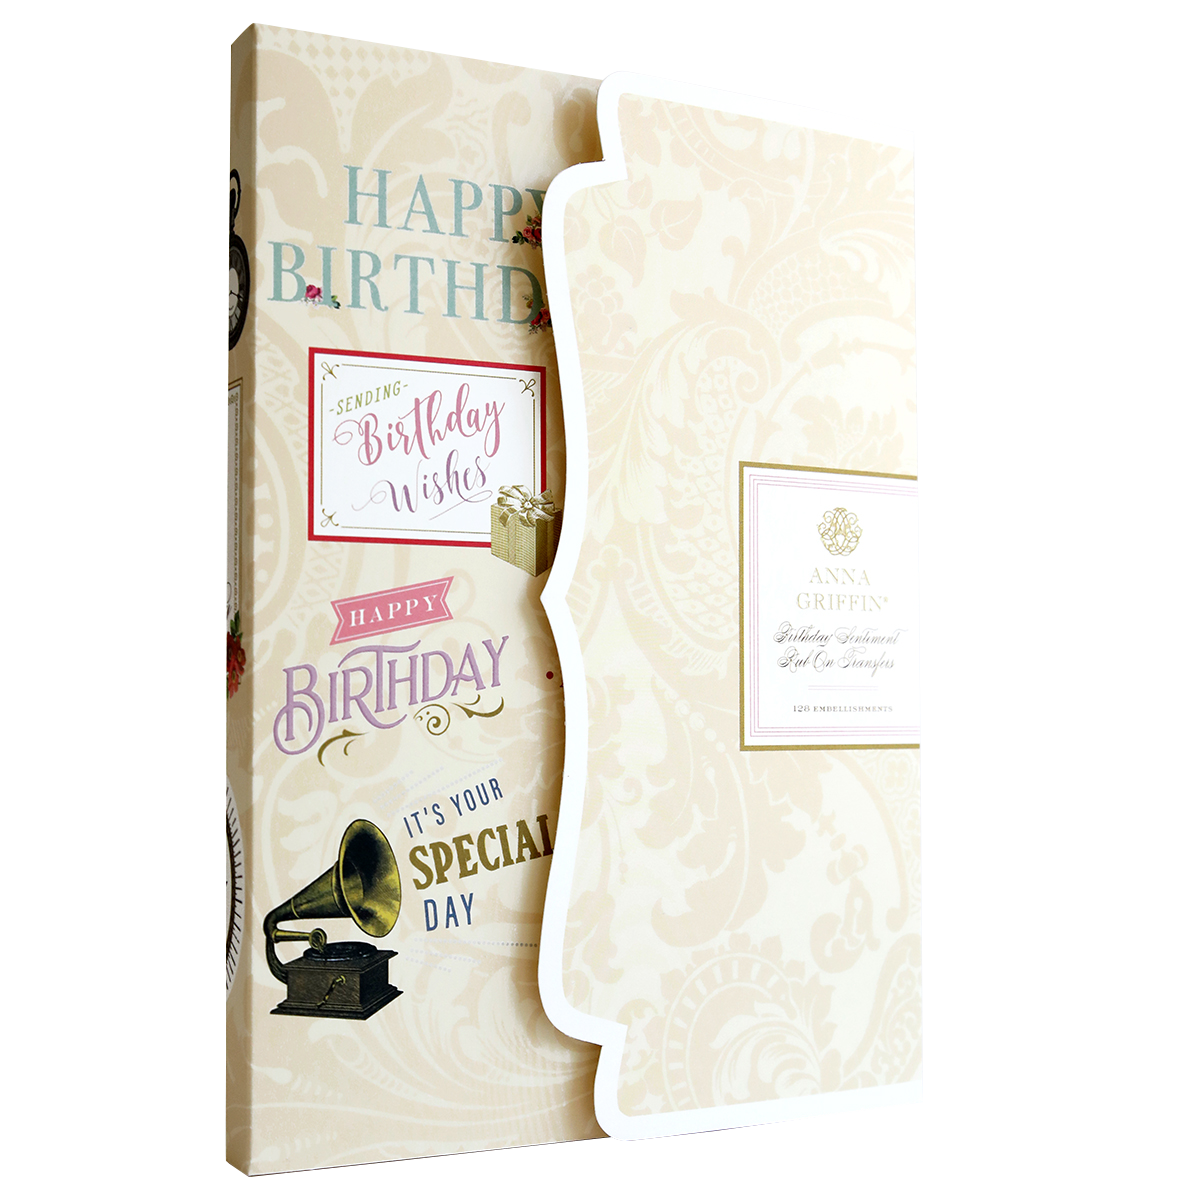 Decorative birthday card box set featuring elegant beige and pink designs with text "happy birthday" and a small black vintage camera decoration, enhanced with Birthday Sentiment Rub Ons.